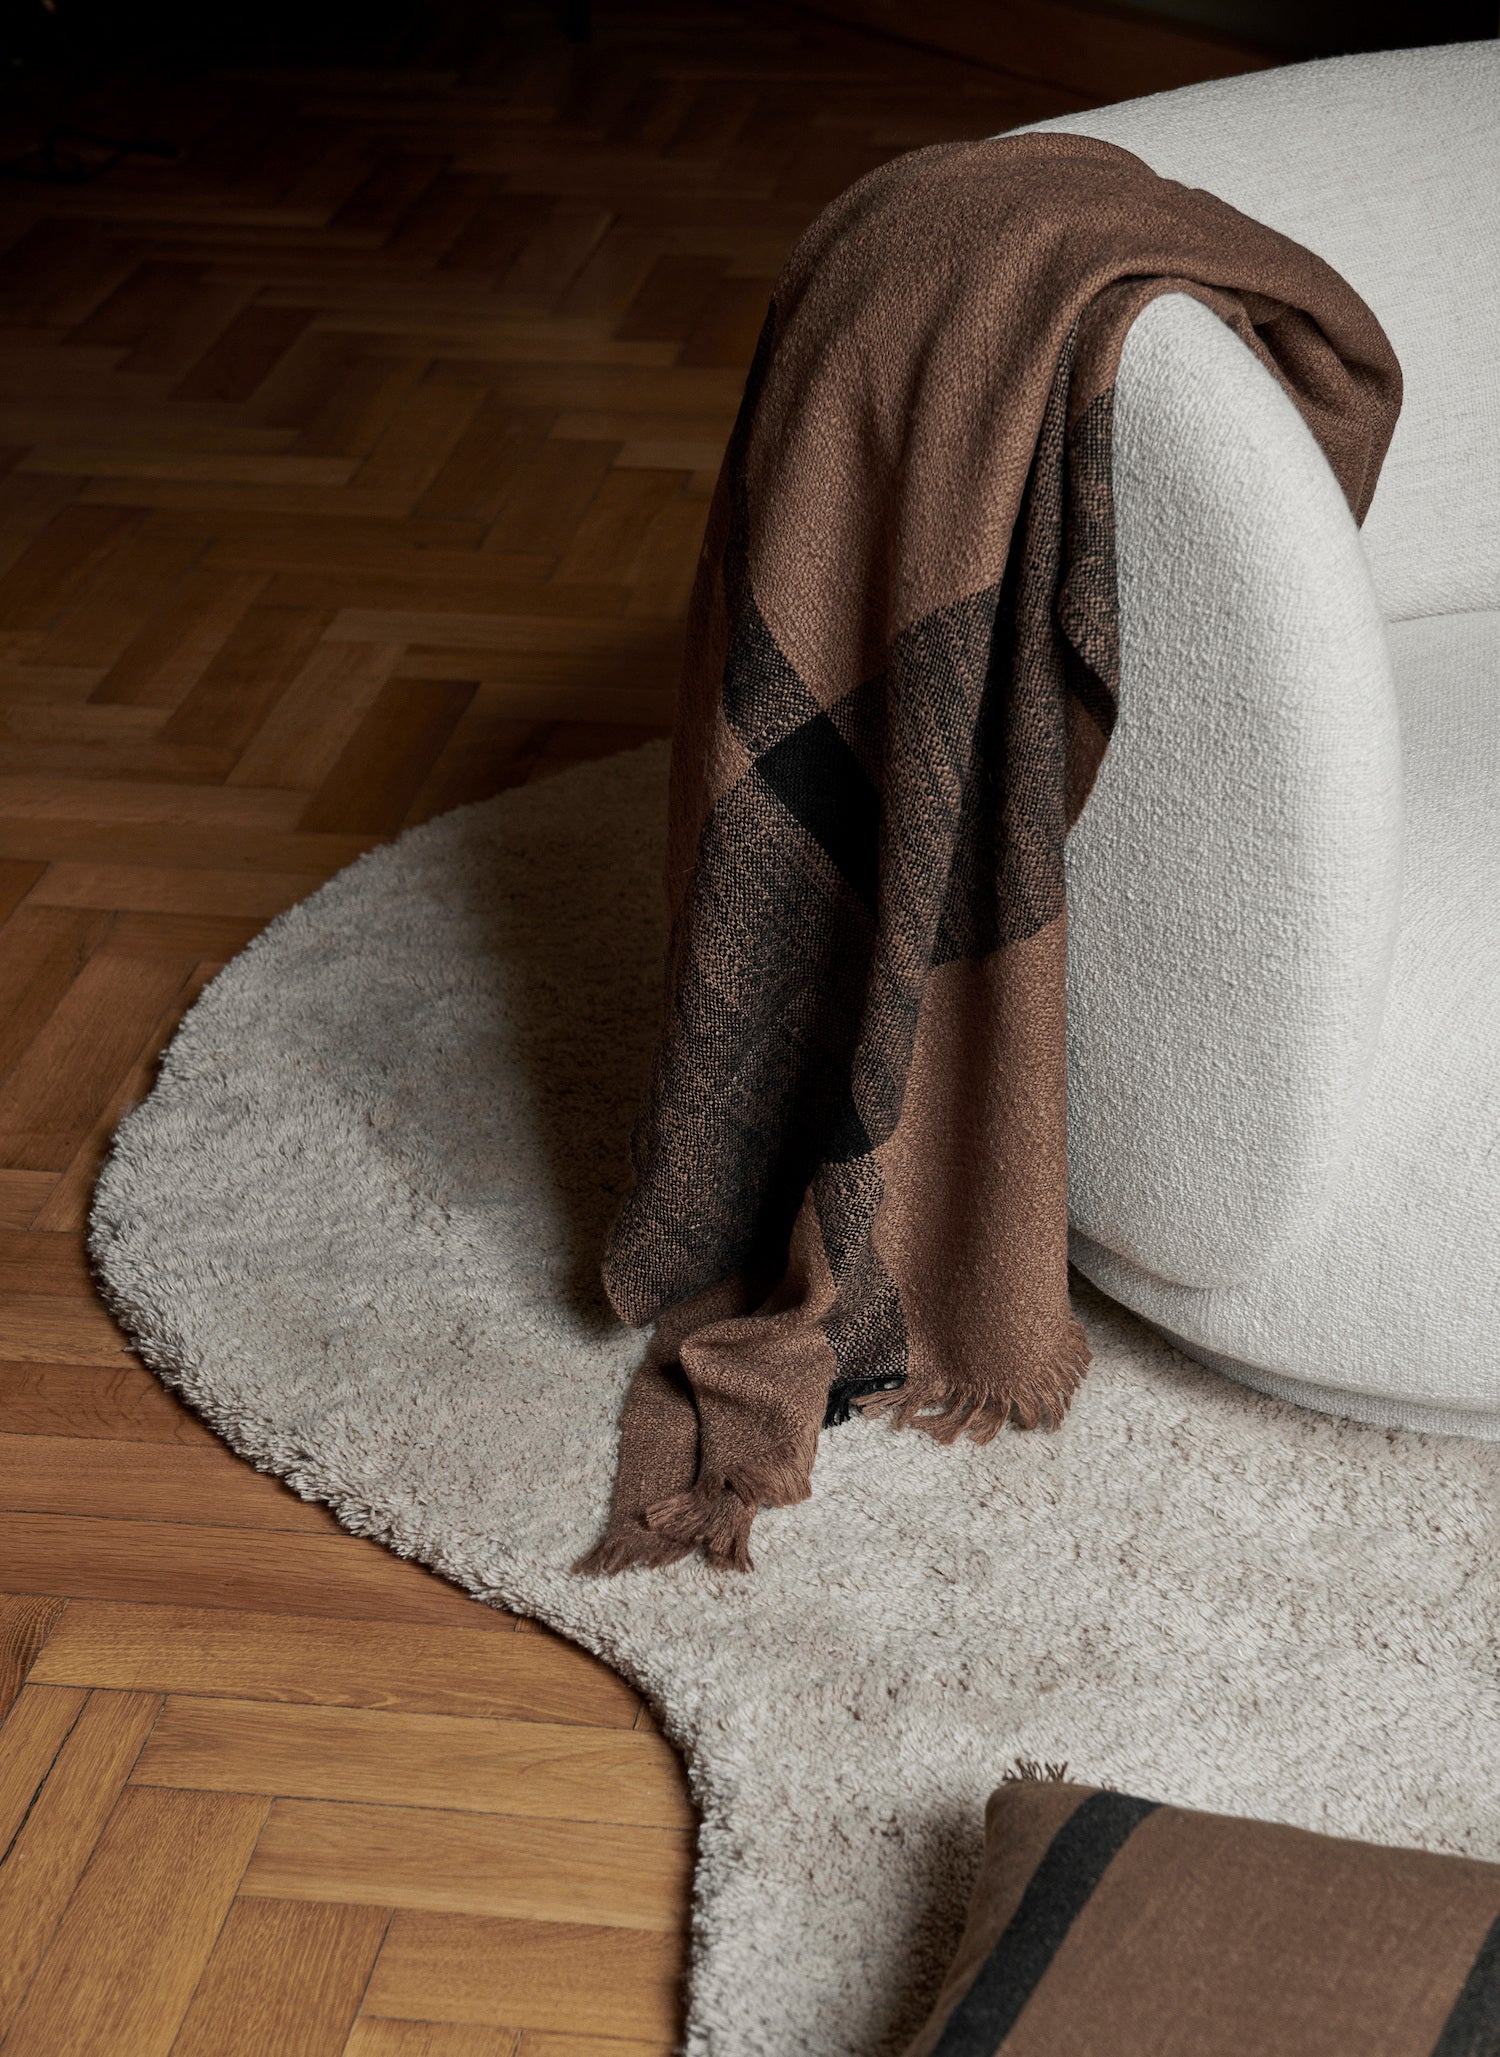 Dry Blanket. A cozy blanket made entirely from an uneven wool yarn that will add a warm, inviting feeling to any space.